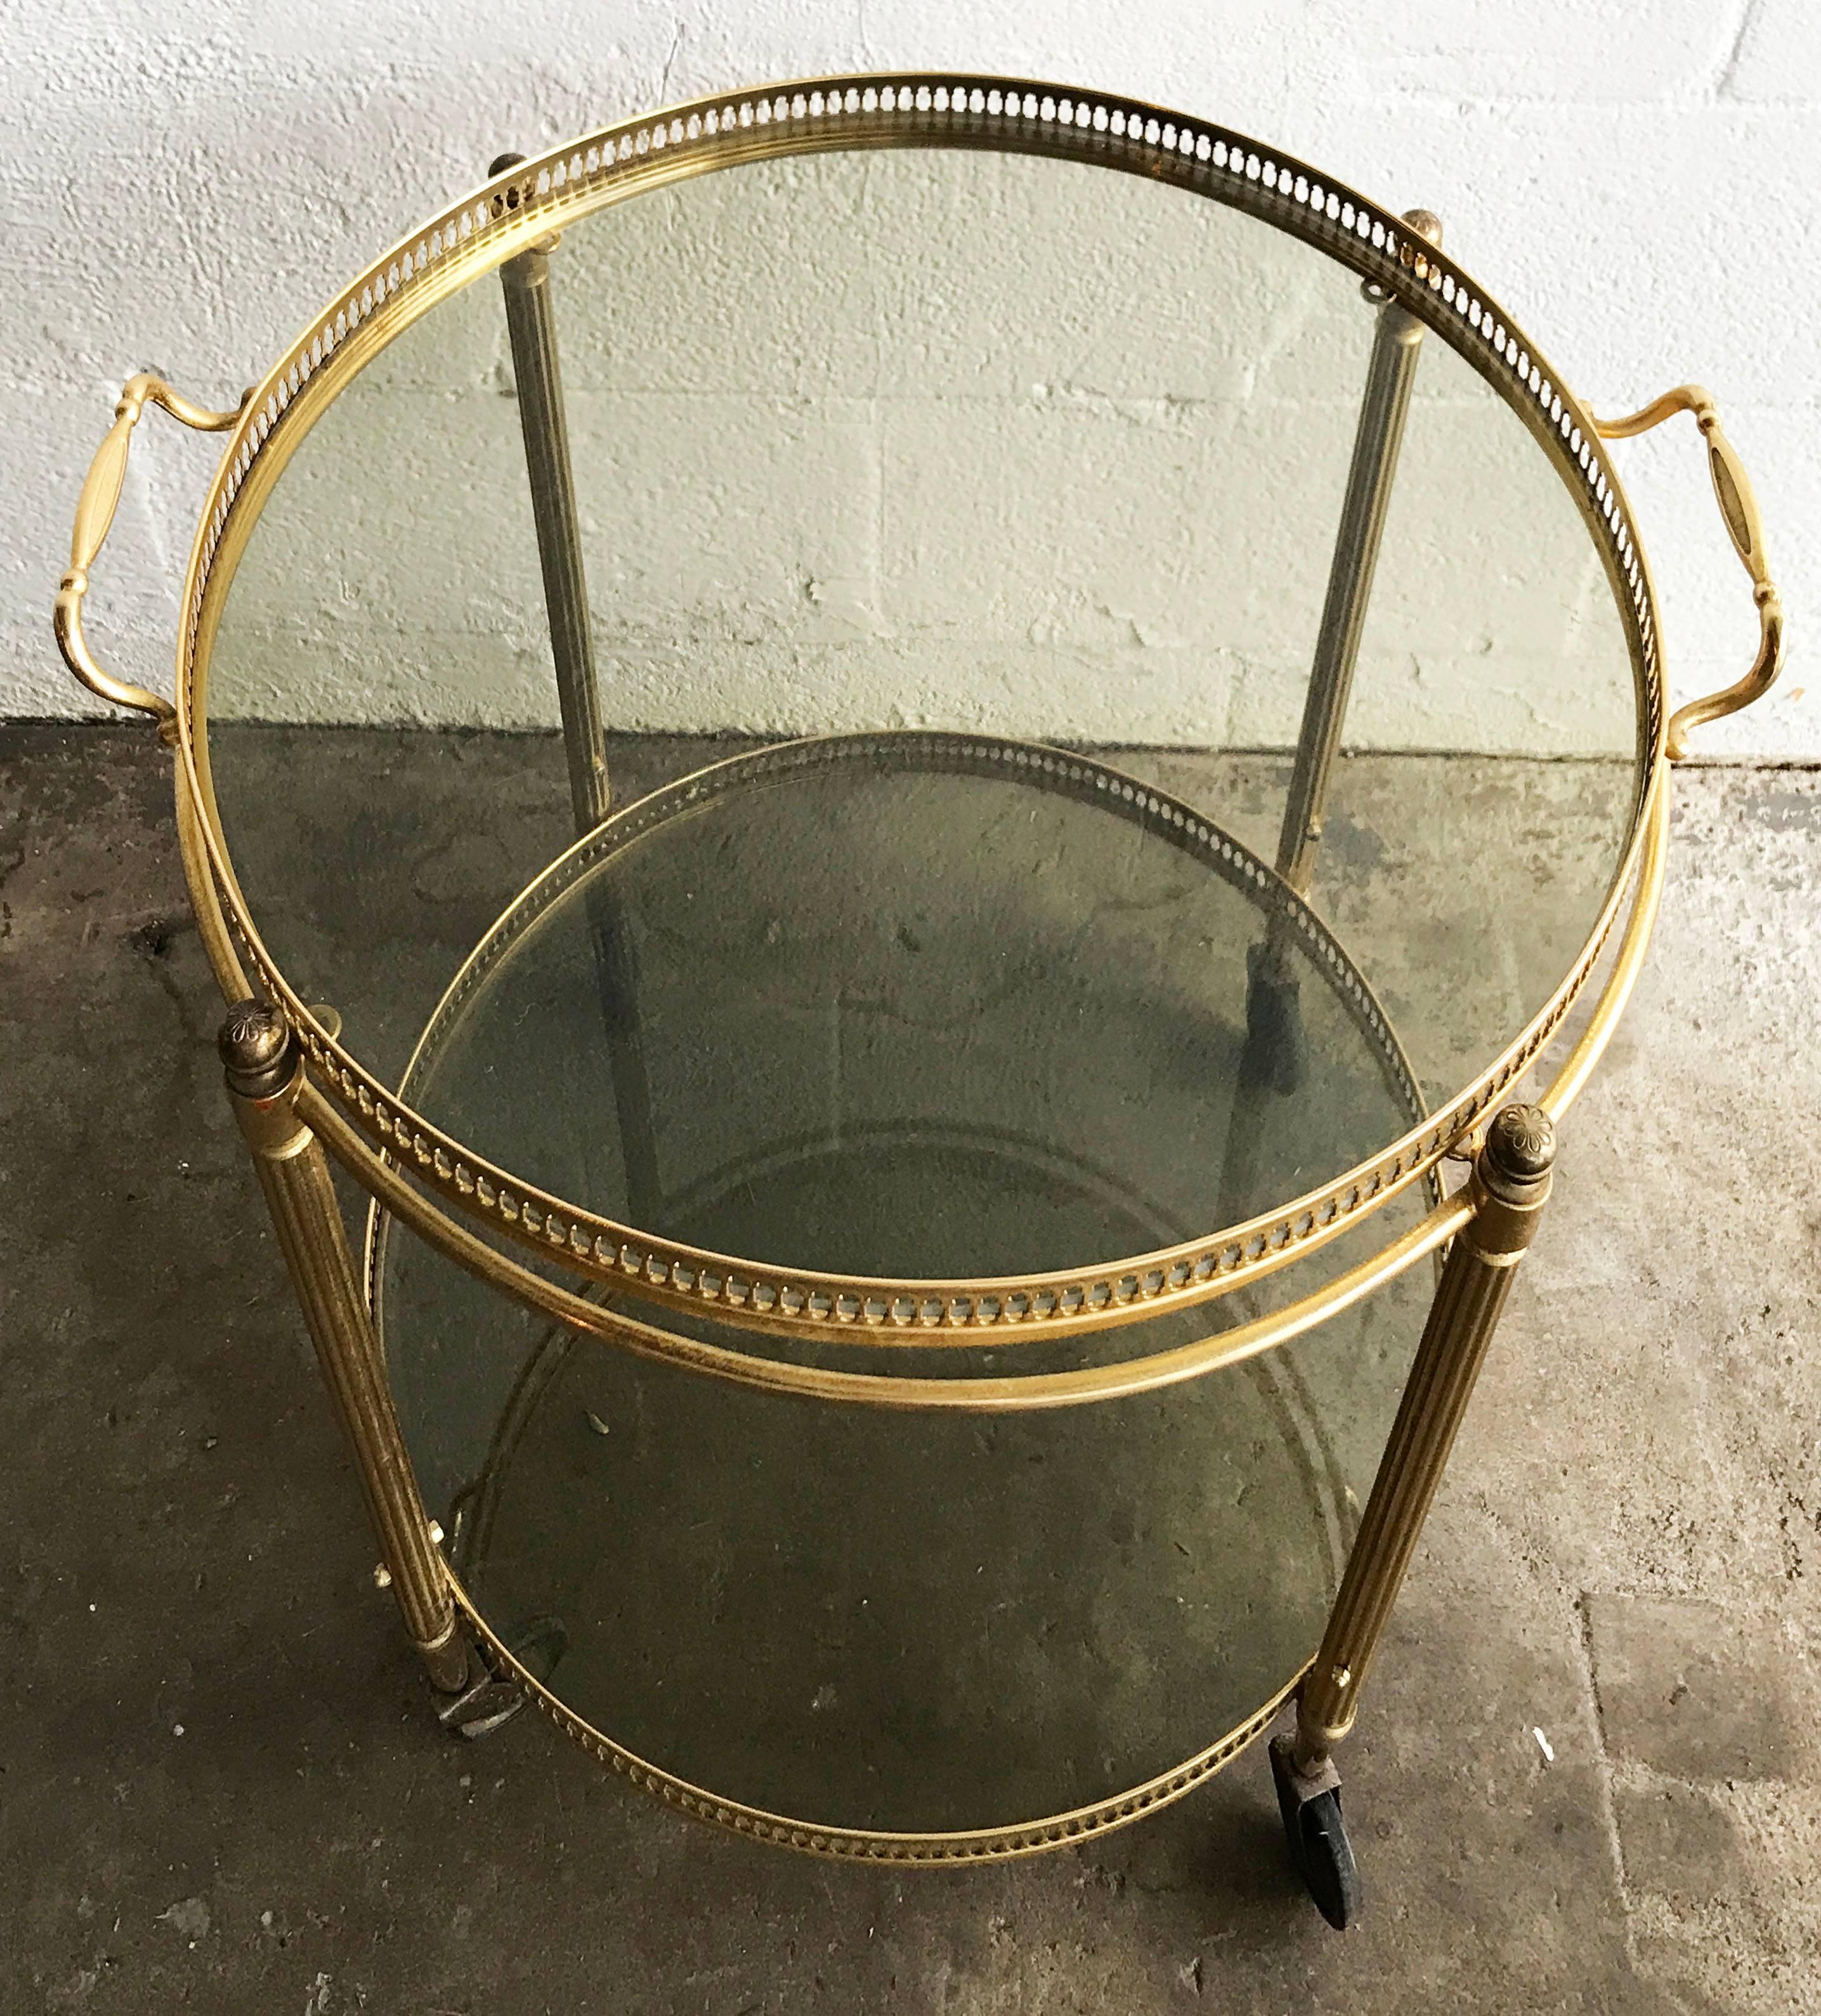 Superb round bar cart made by Maison Baguès
2 tiers
Serving tray is removable.